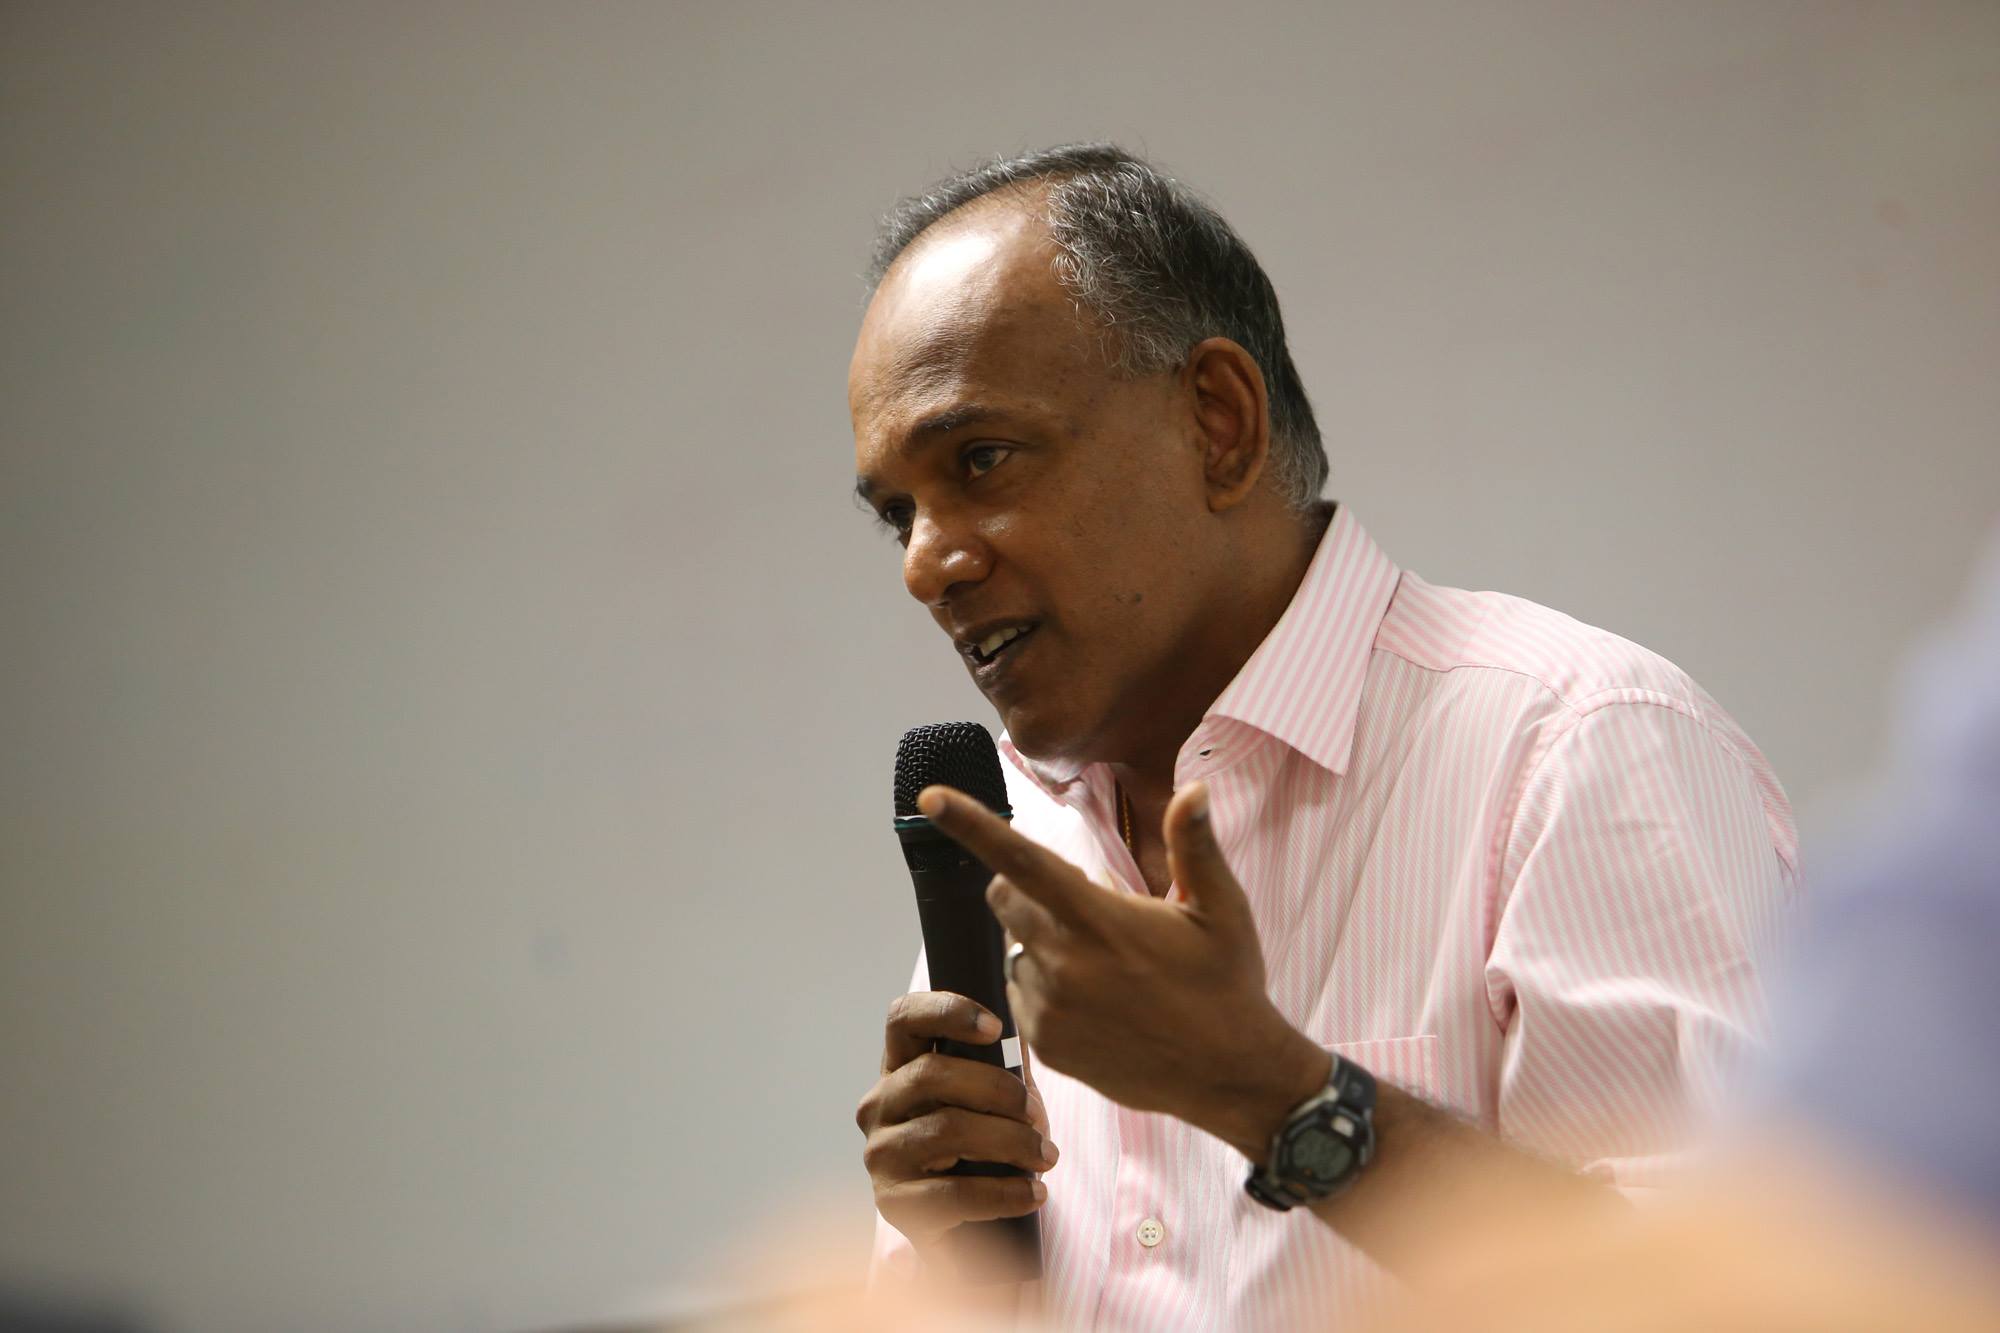 Fb Comments By Pm Lee And Foreign Minister K Shanmugam On Missing Flight Airasia Flight Qz8501 Mothership Sg News From Singapore Asia And Around The World